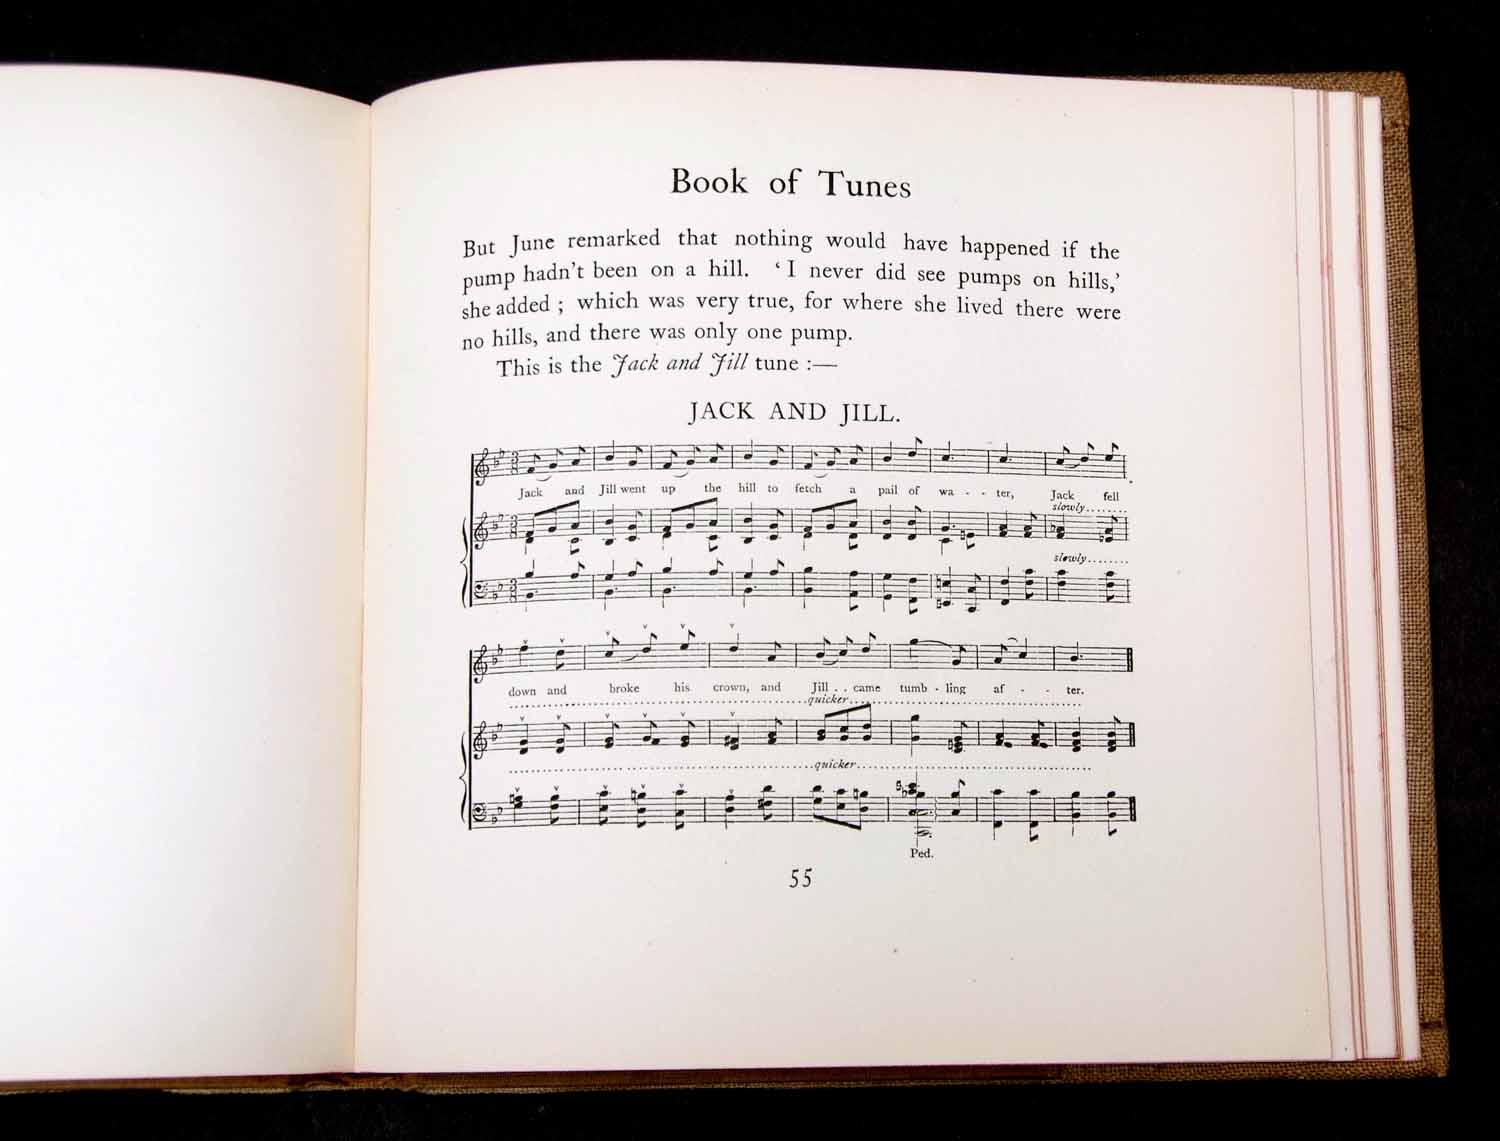 [ELIZABETH VON ARNIM]: THE APRIL BABY'S BOOK OF TUNES..., ill Kate Greenaway, London and New York, - Image 3 of 3